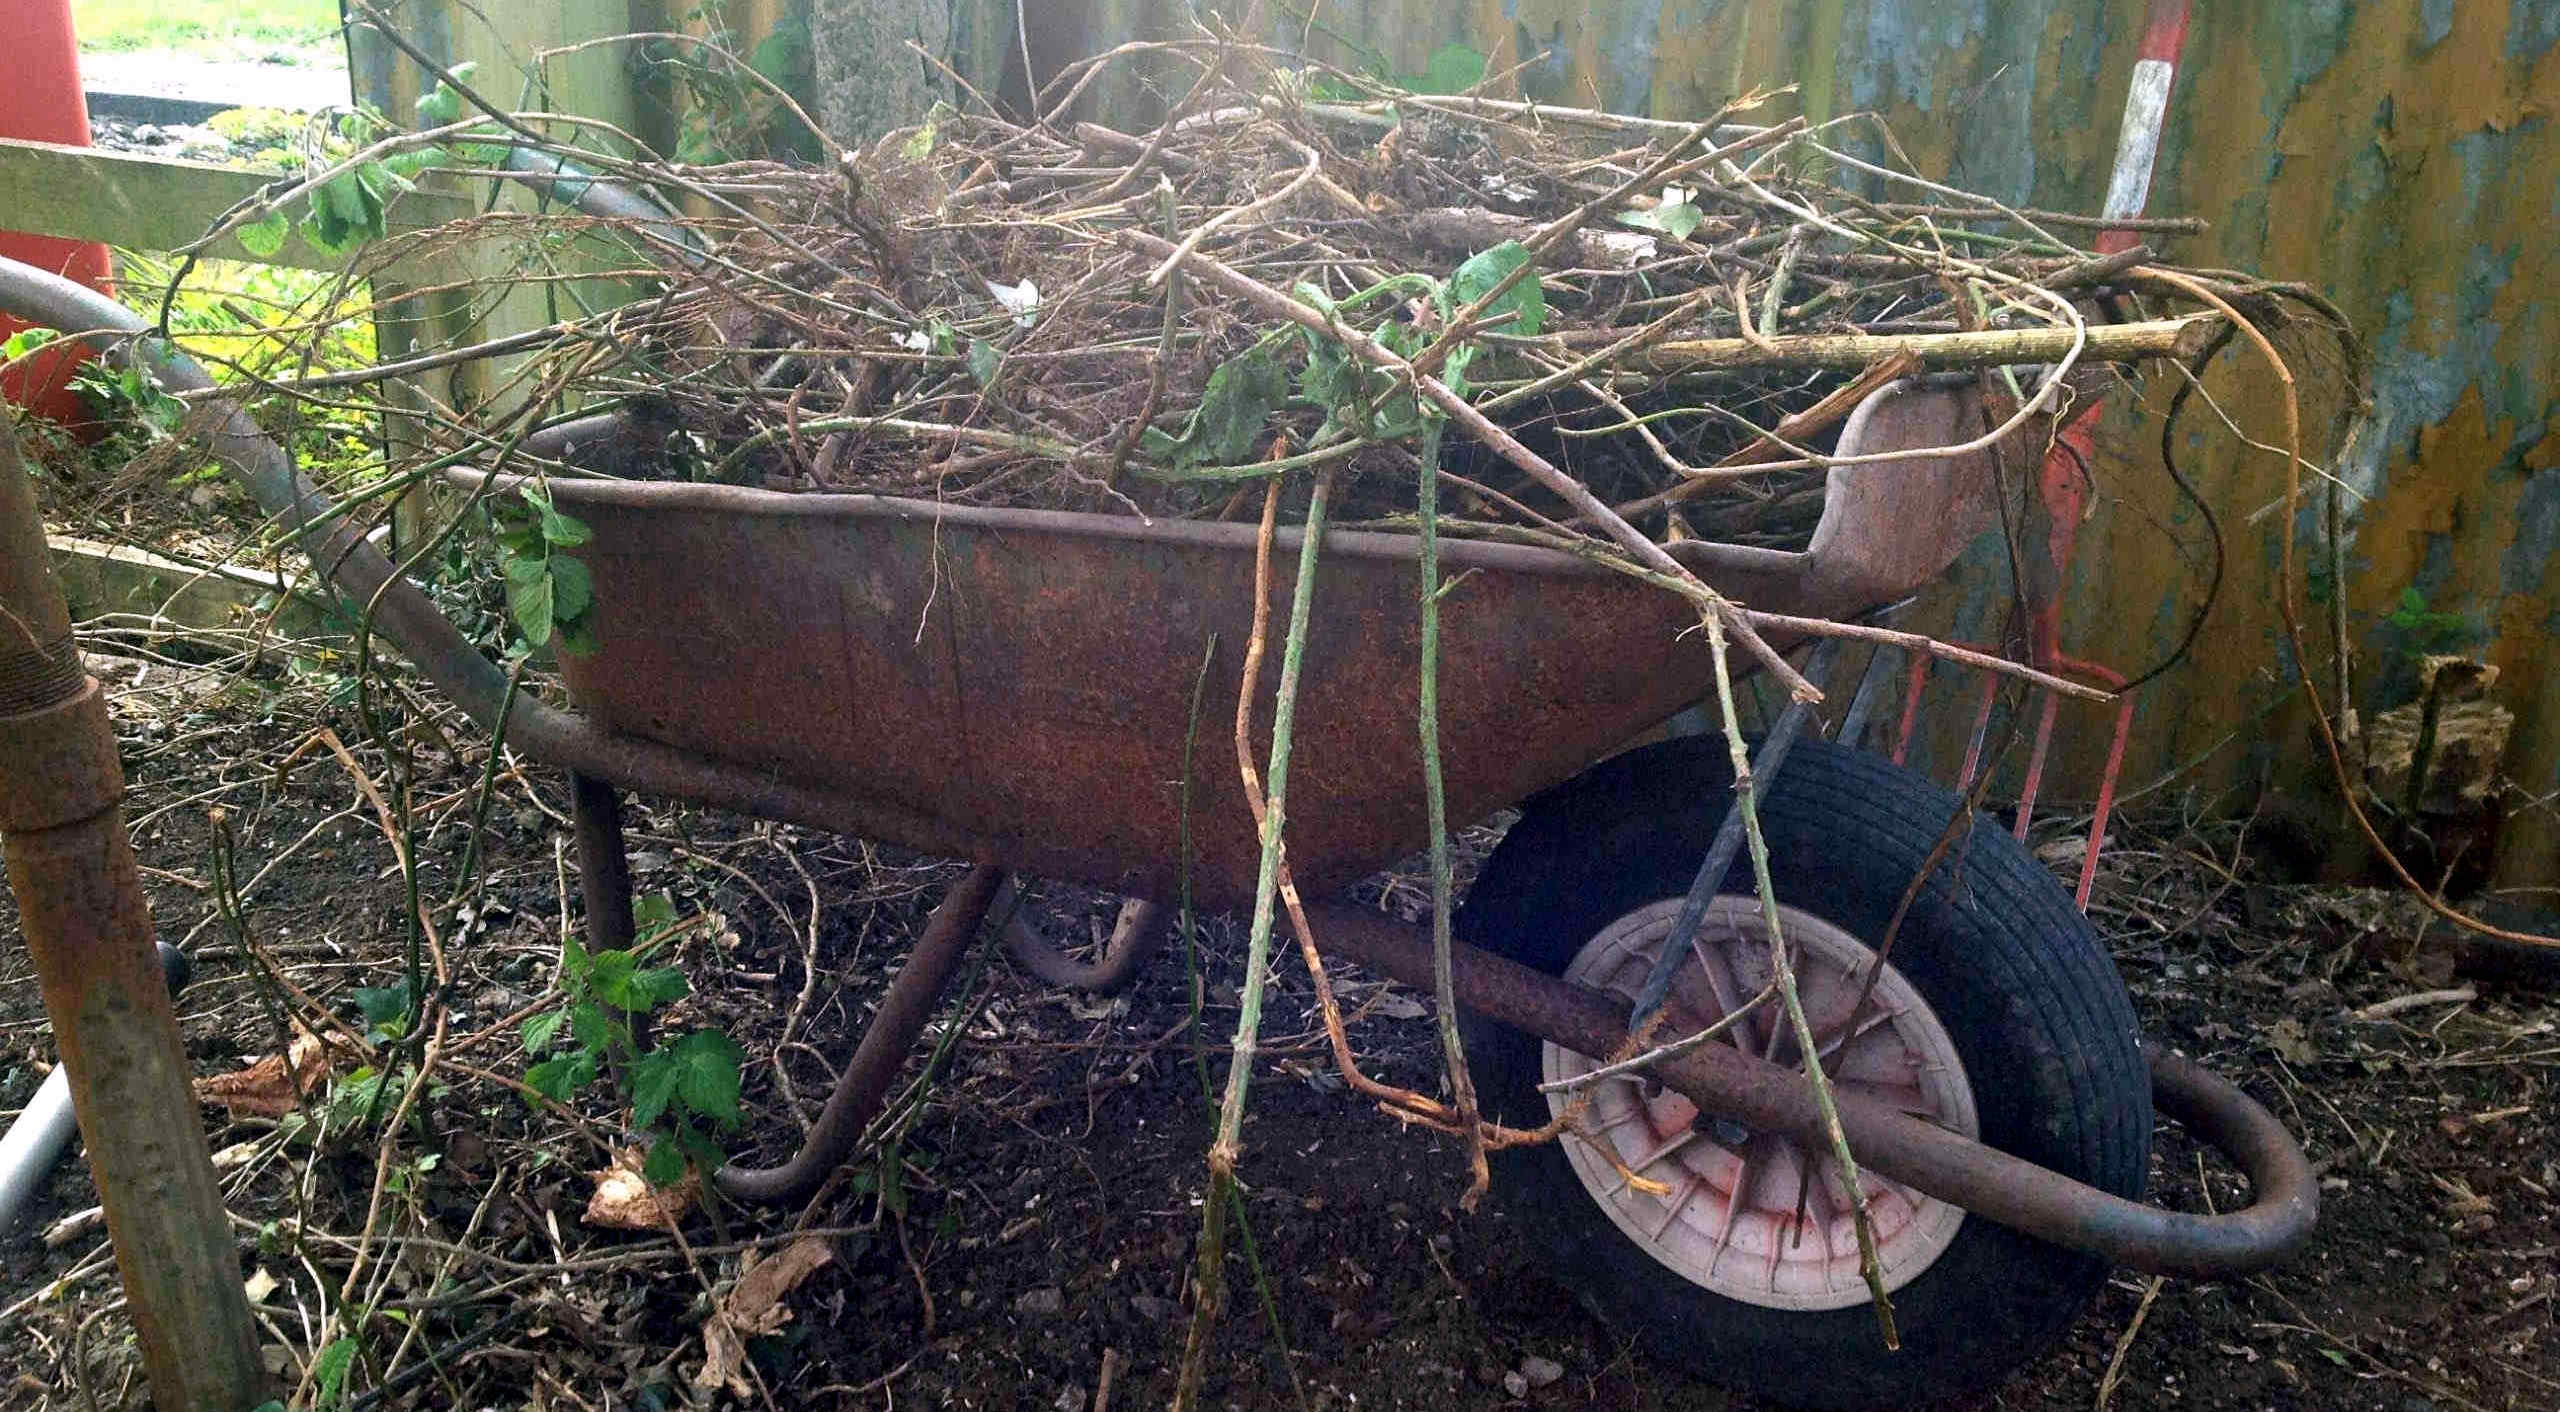 rustic image of old wheelbarrow containing garden offcuts, against a background of part fence and part corrugated metal shed wall.